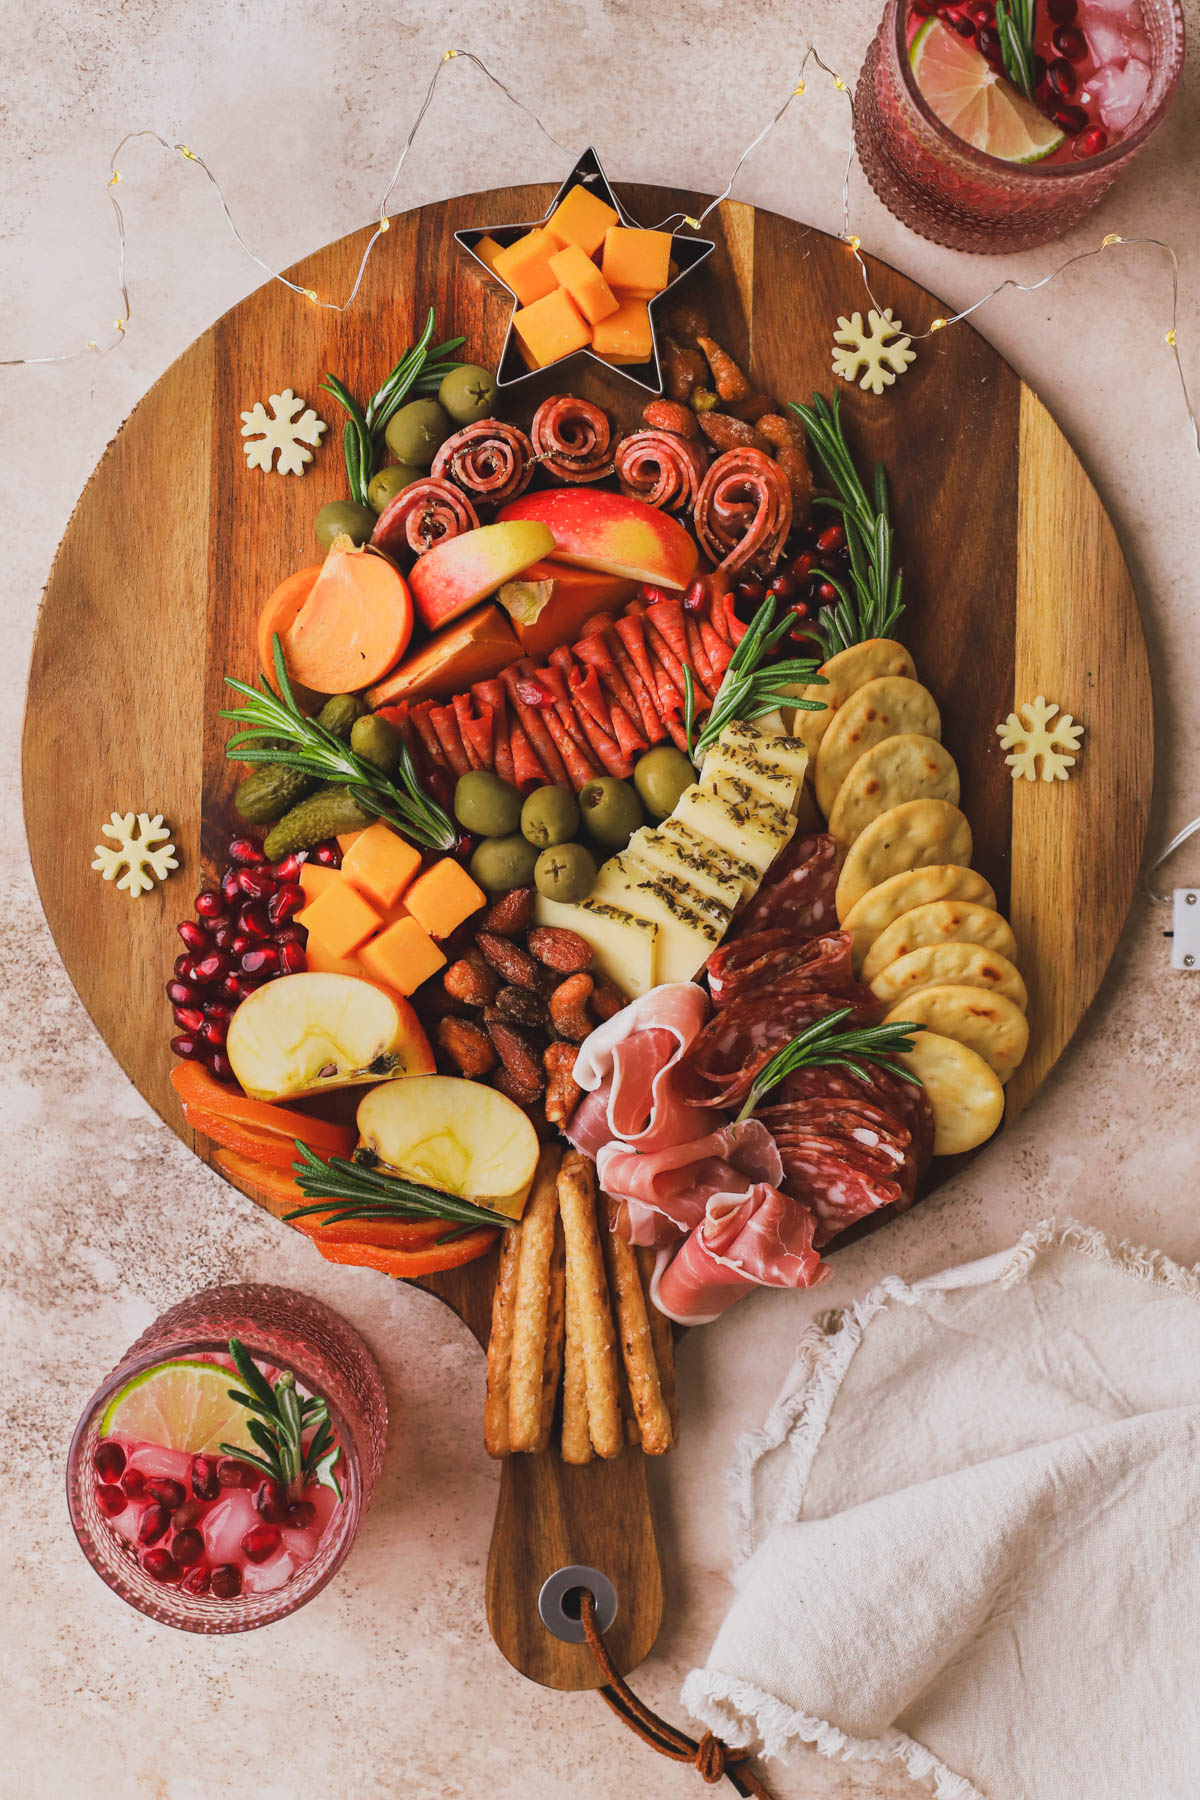 This charcuterie Christmas tree is made with cured meats, cheeses, olives, persimmons, apples, crackers and fresh rosemary.  